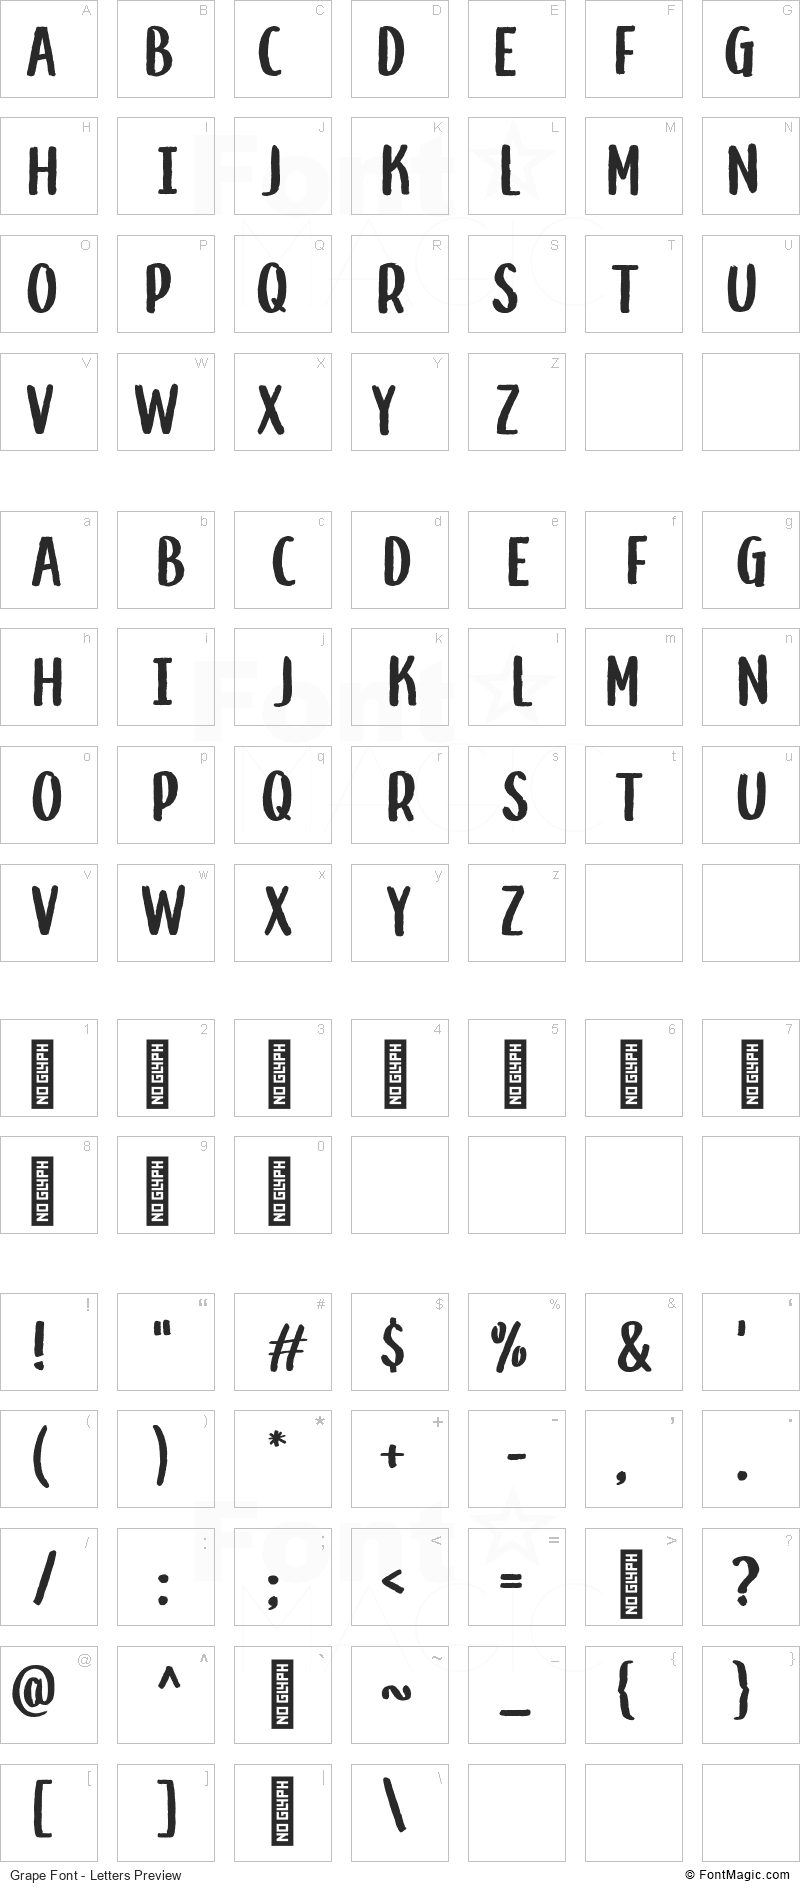 Grape Font - All Latters Preview Chart